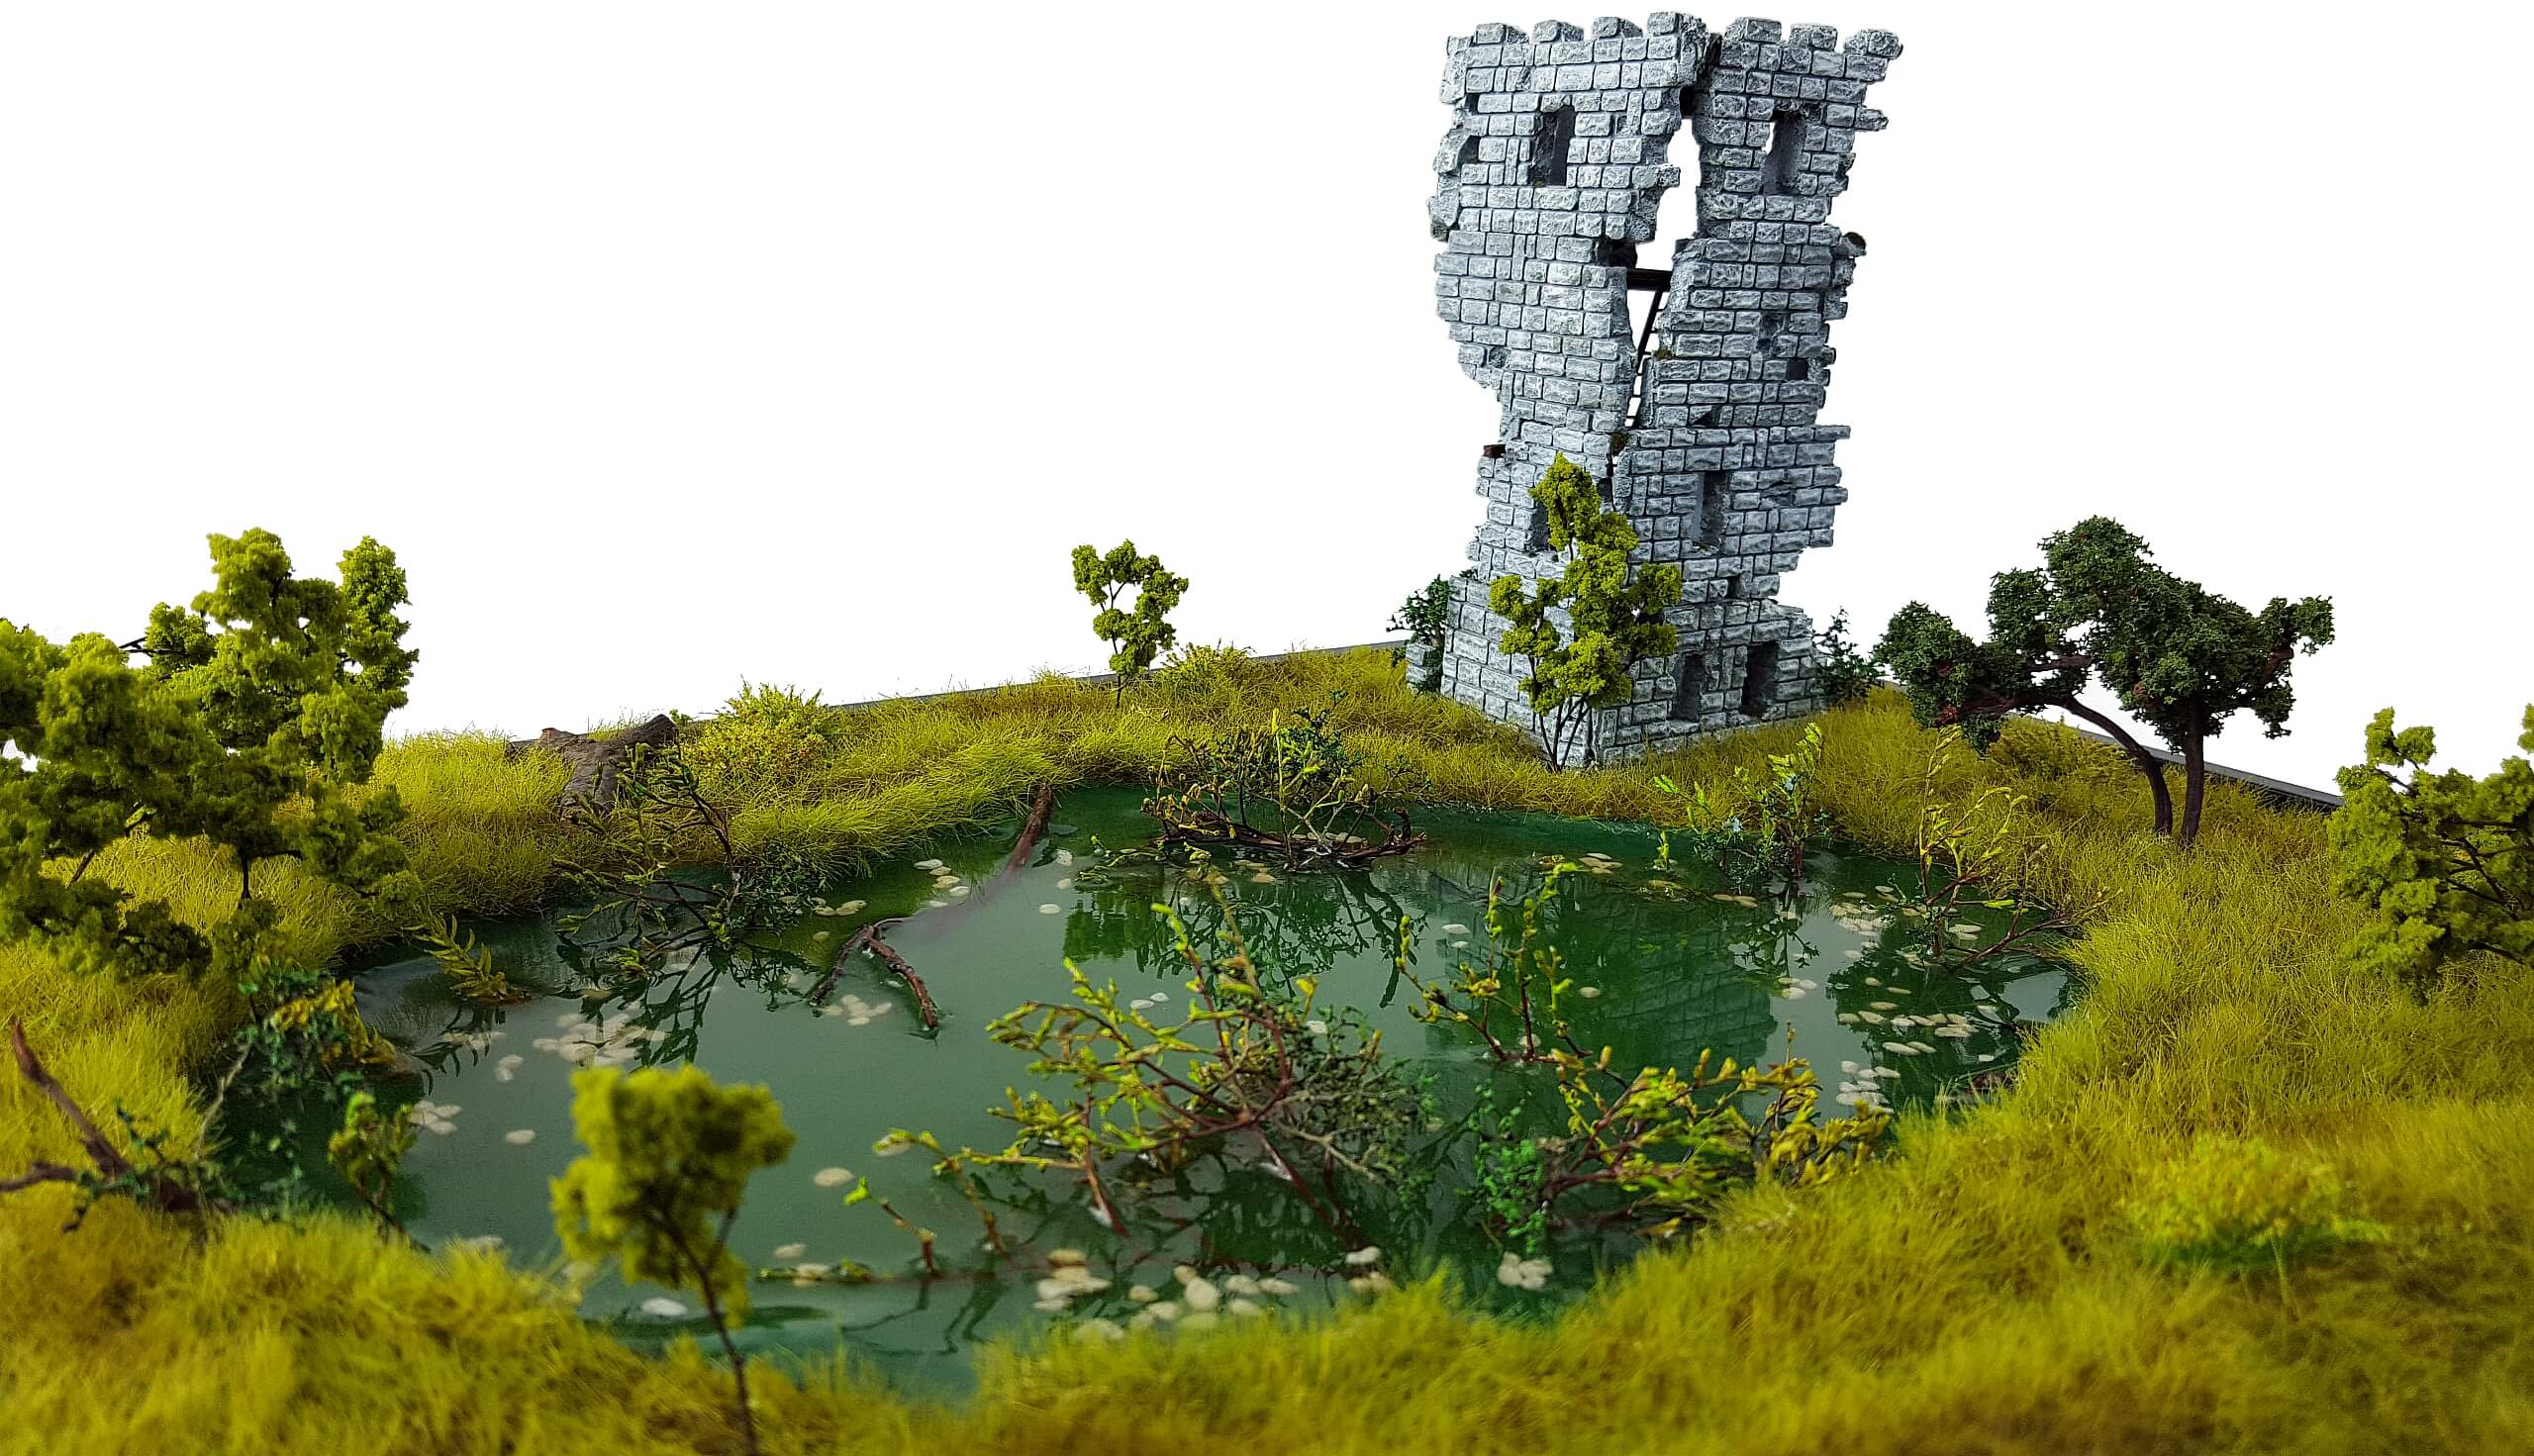 Diorama - landscape with green vegetation and tower ruin